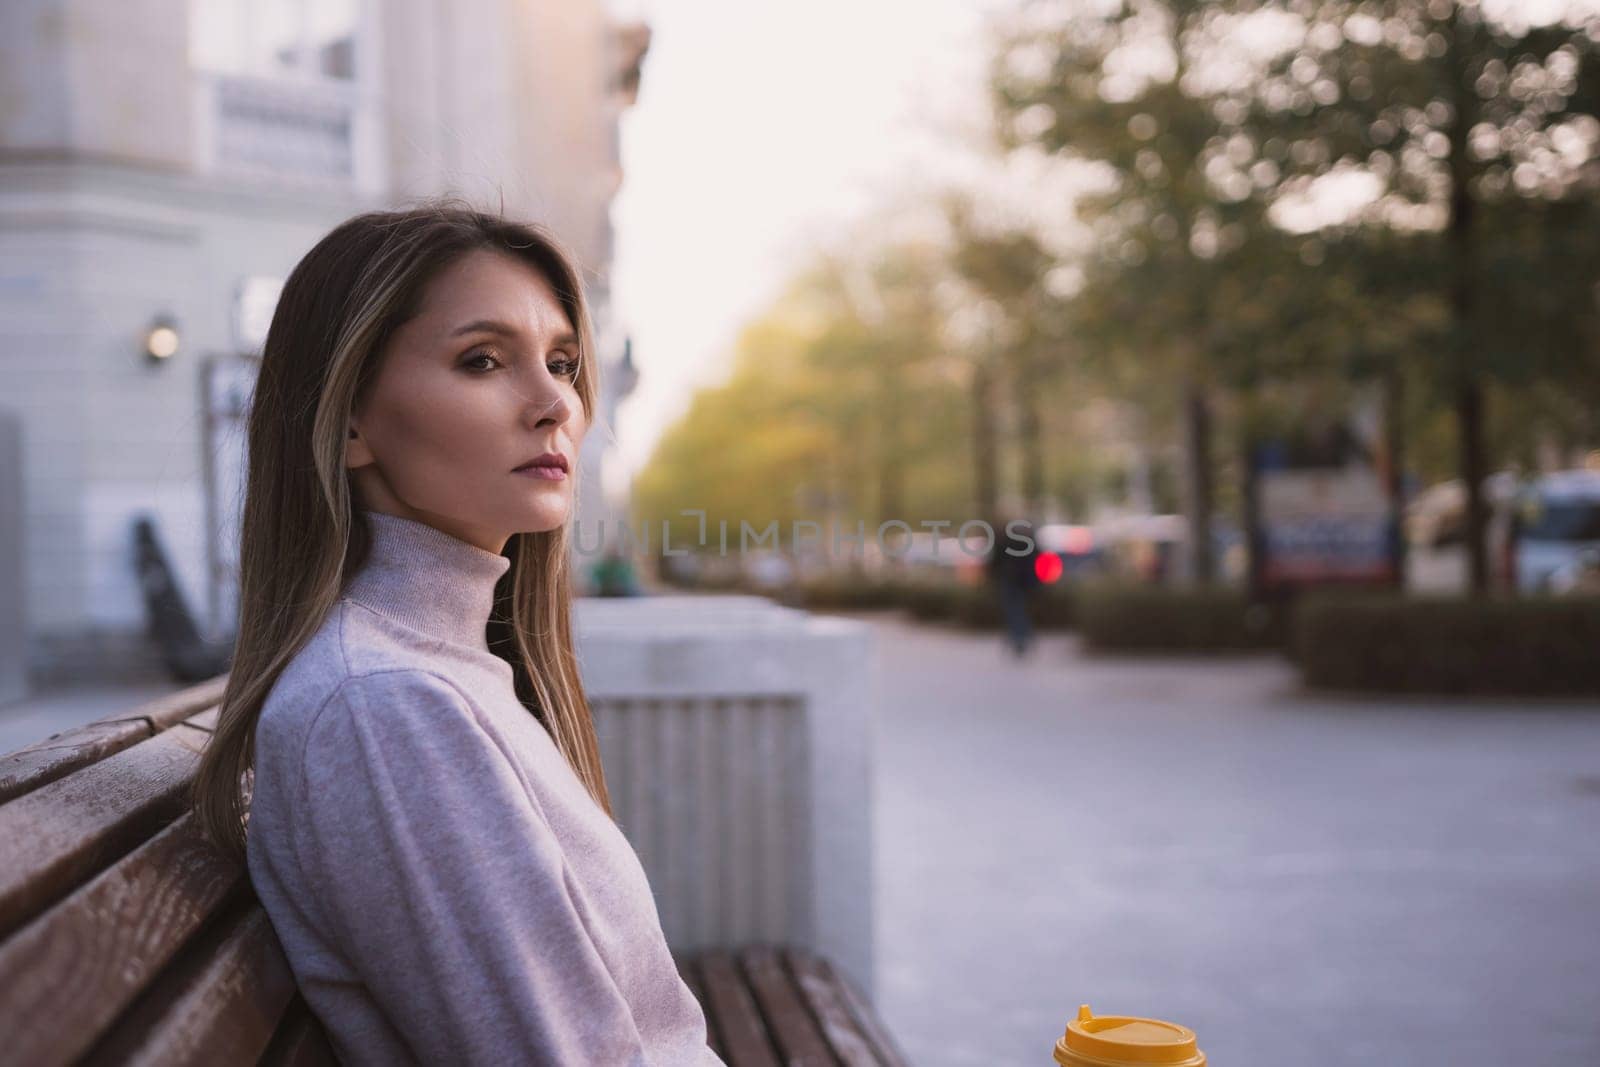 A woman sits on a bench in a city street, looking at the camera. She is wearing a gray sweater and has a cup in her hand. The scene is quiet and peaceful